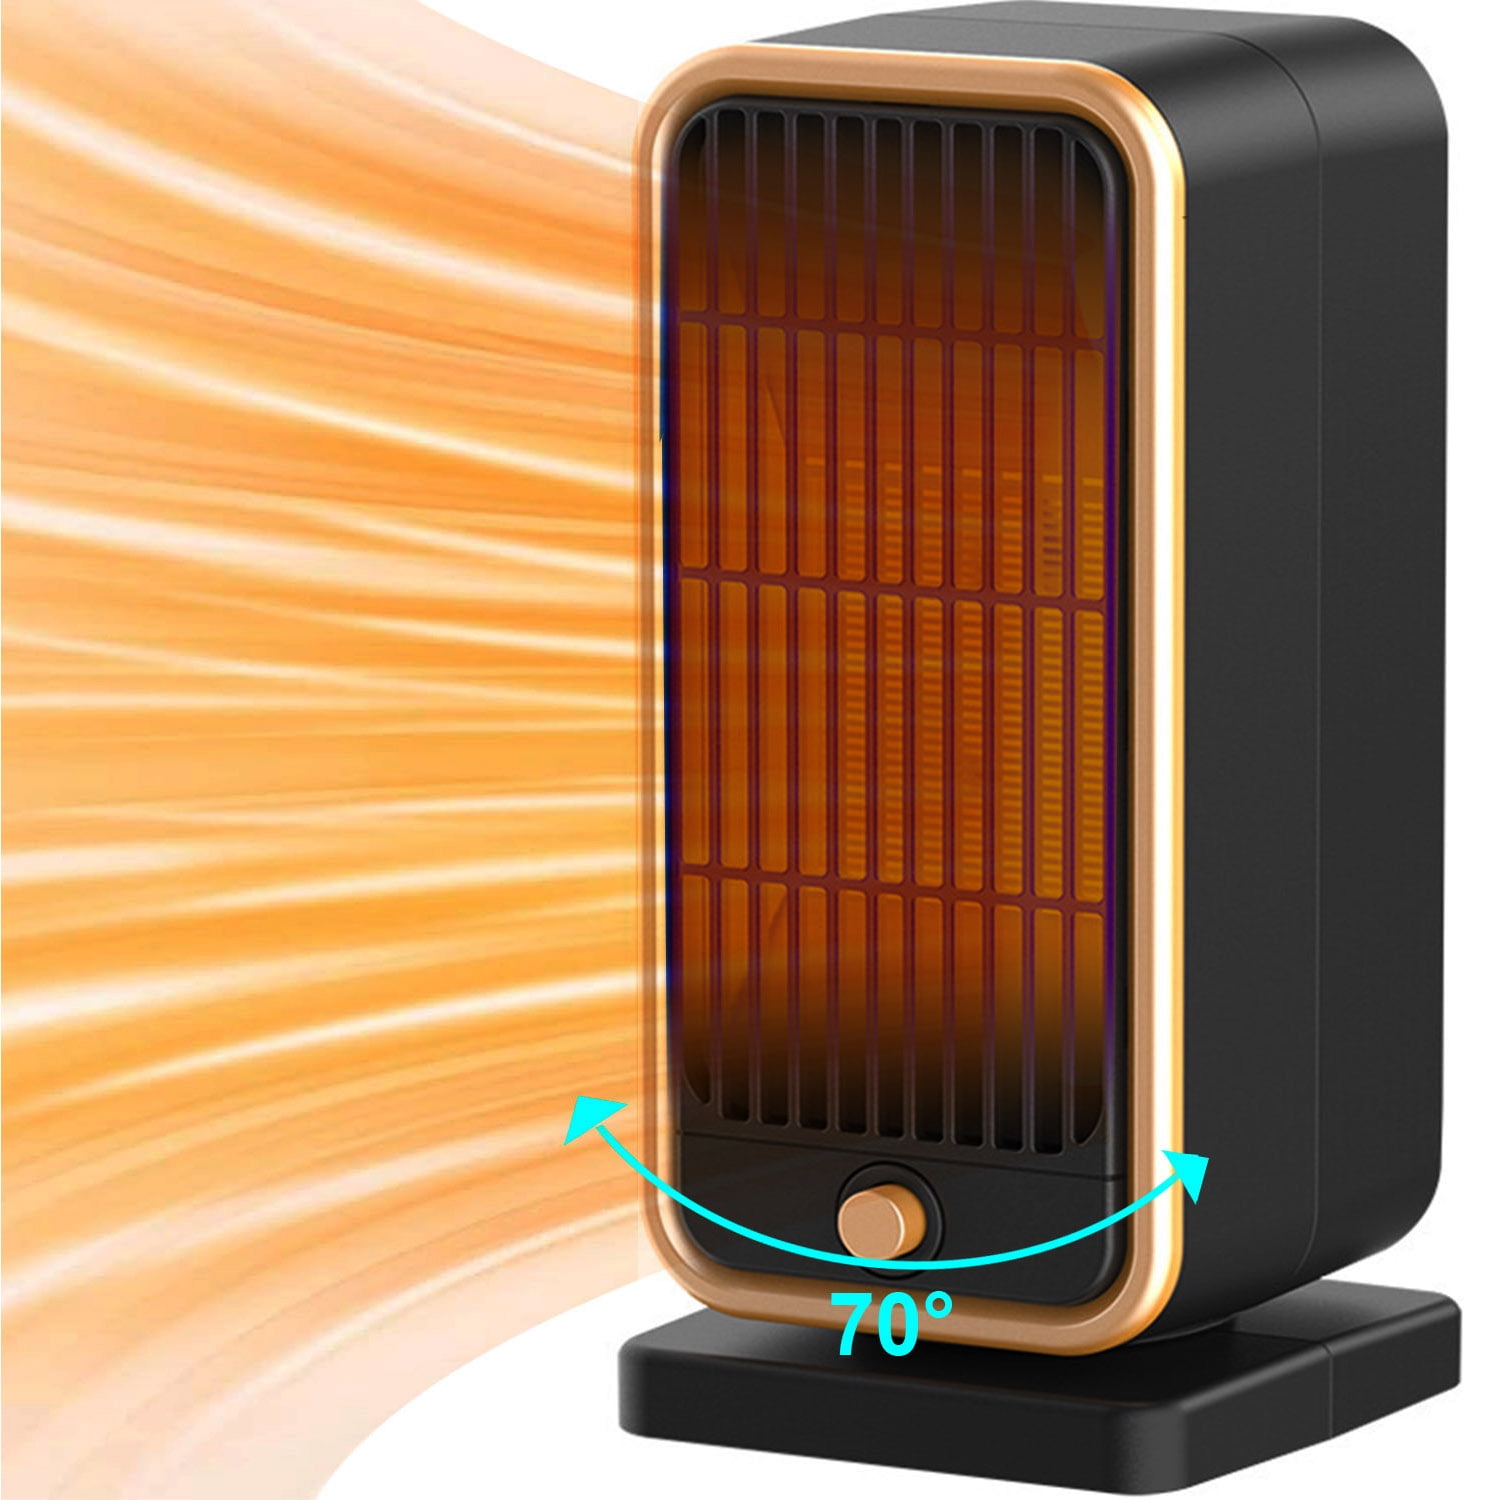 China Space Heaters For Indoor Use Portable Heater With 70°Oscillation  1500W PTC Ceramic Solar Electric Heater With Digital Thermostat Fast Safety  Heating 12h Timer Quiet Small Heater For Office Home Manufacturers,  Suppliers